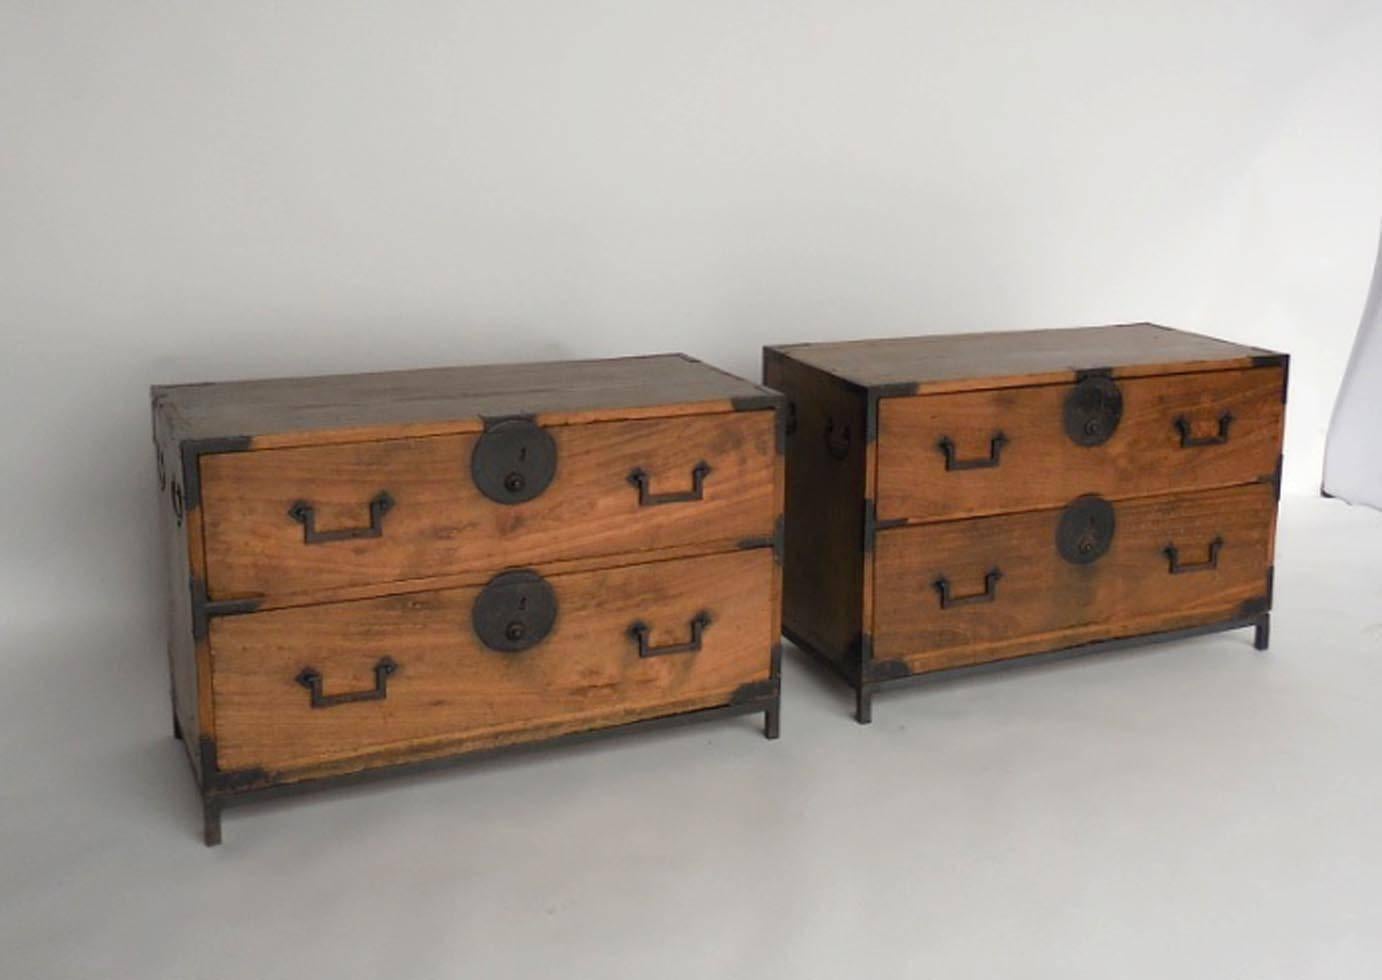 19th century Hinoki wood tansus on custom iron bases. All original. Hand-forged hardware, bamboo nail. Fully functional, two drawers each. Natural beautiful patina.